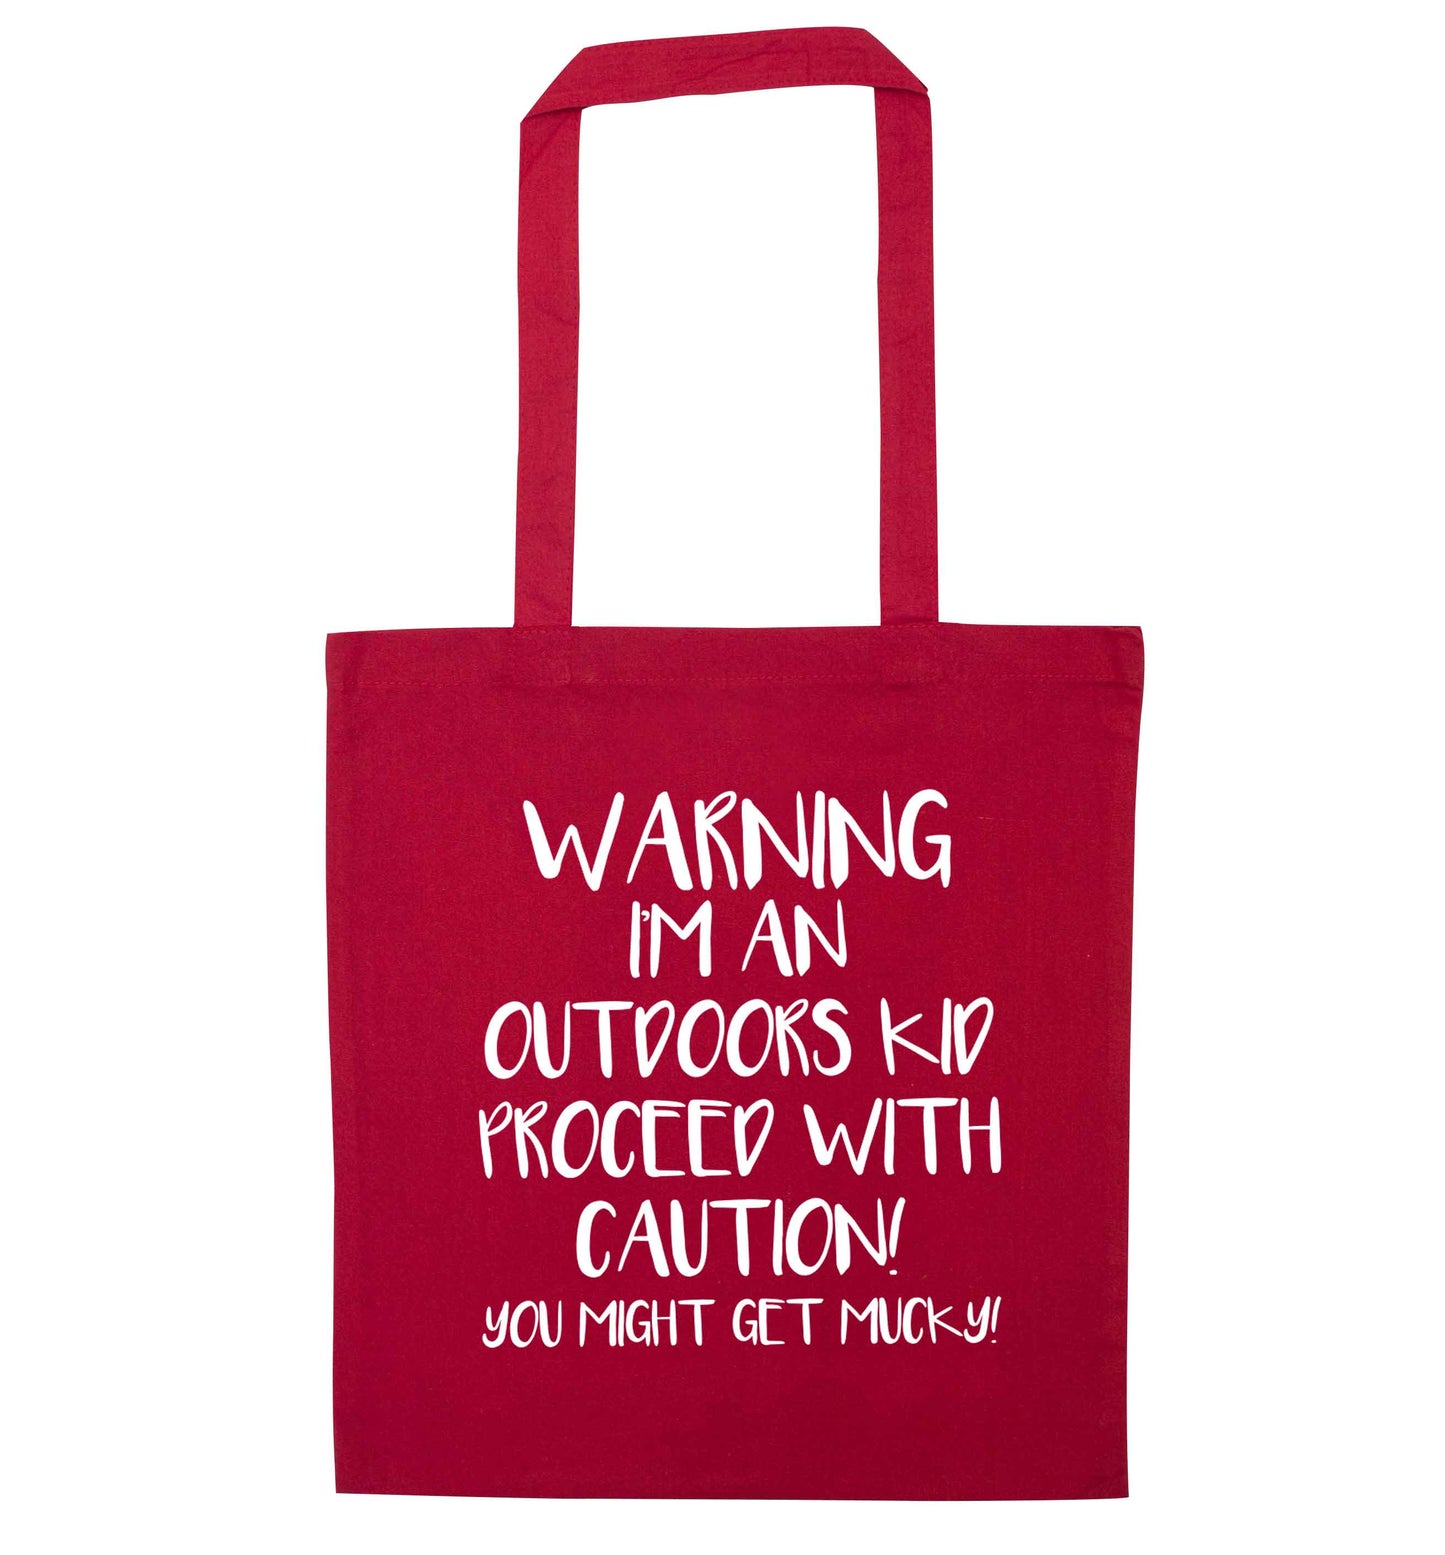 Warning I'm an outdoors kid! Proceed with caution you might get mucky red tote bag